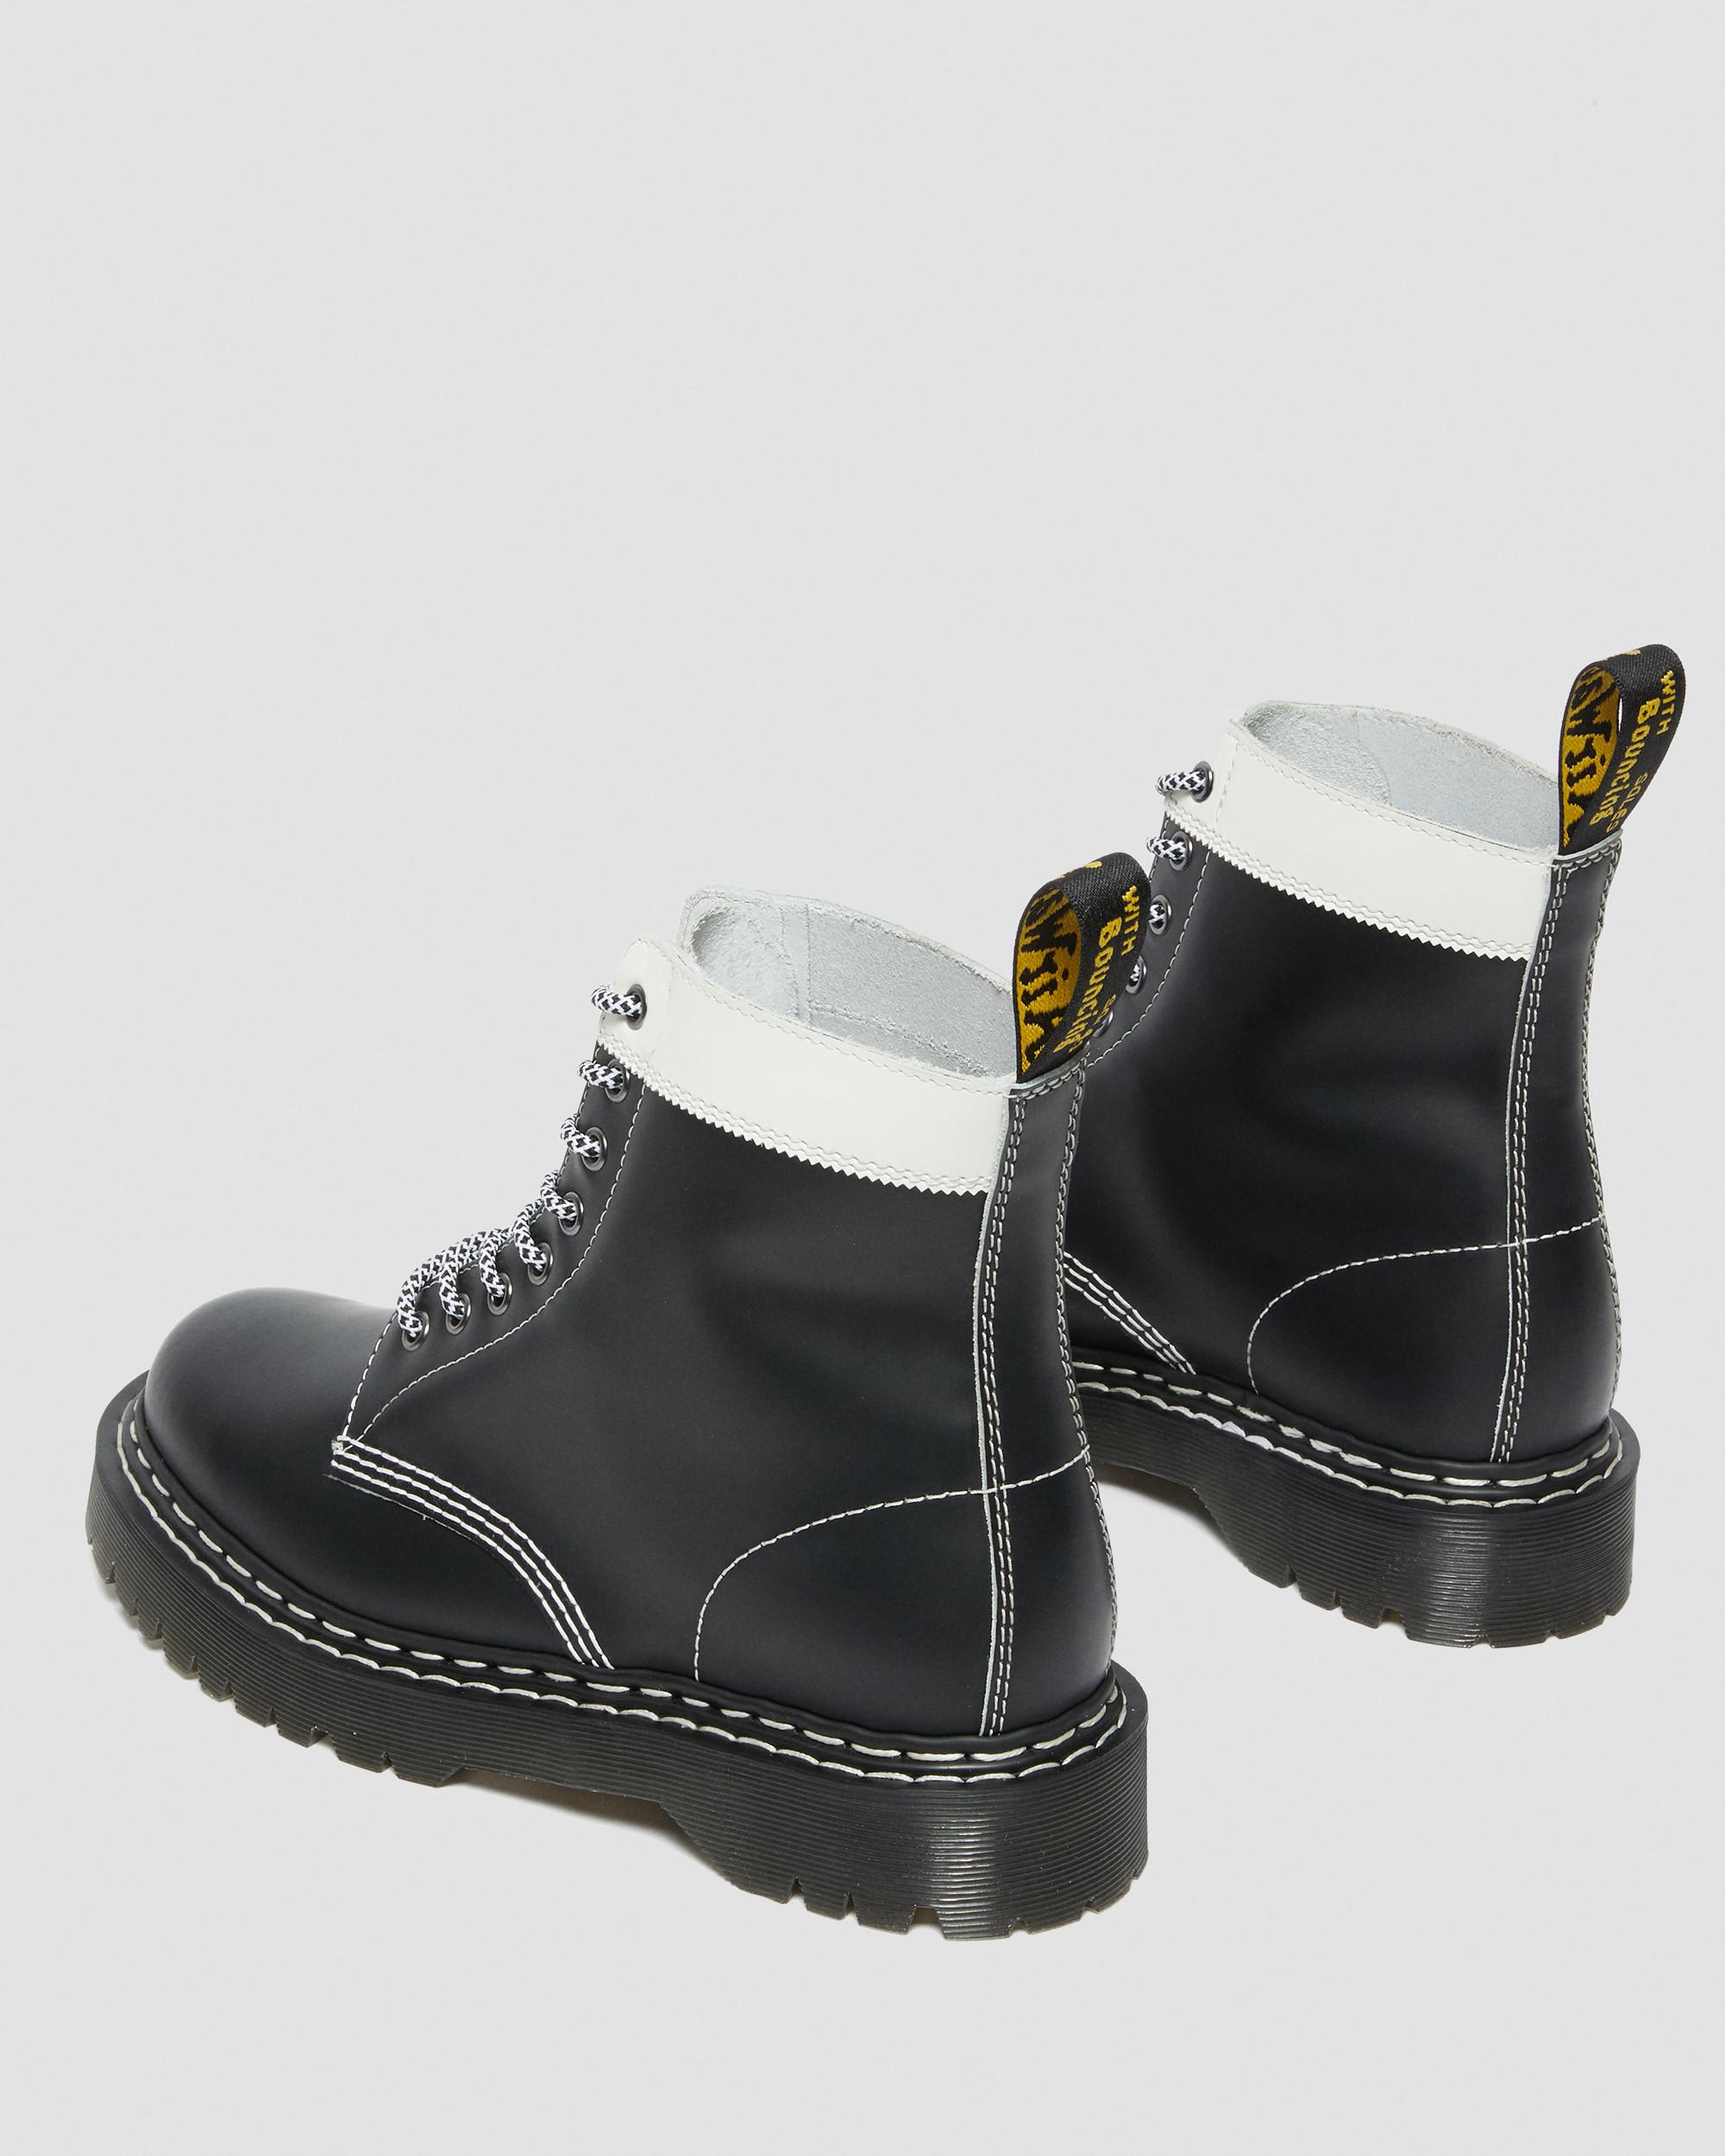 1460 Pascal Bex Leather Contrast Lace Up Boots in Black | Dr. Martens